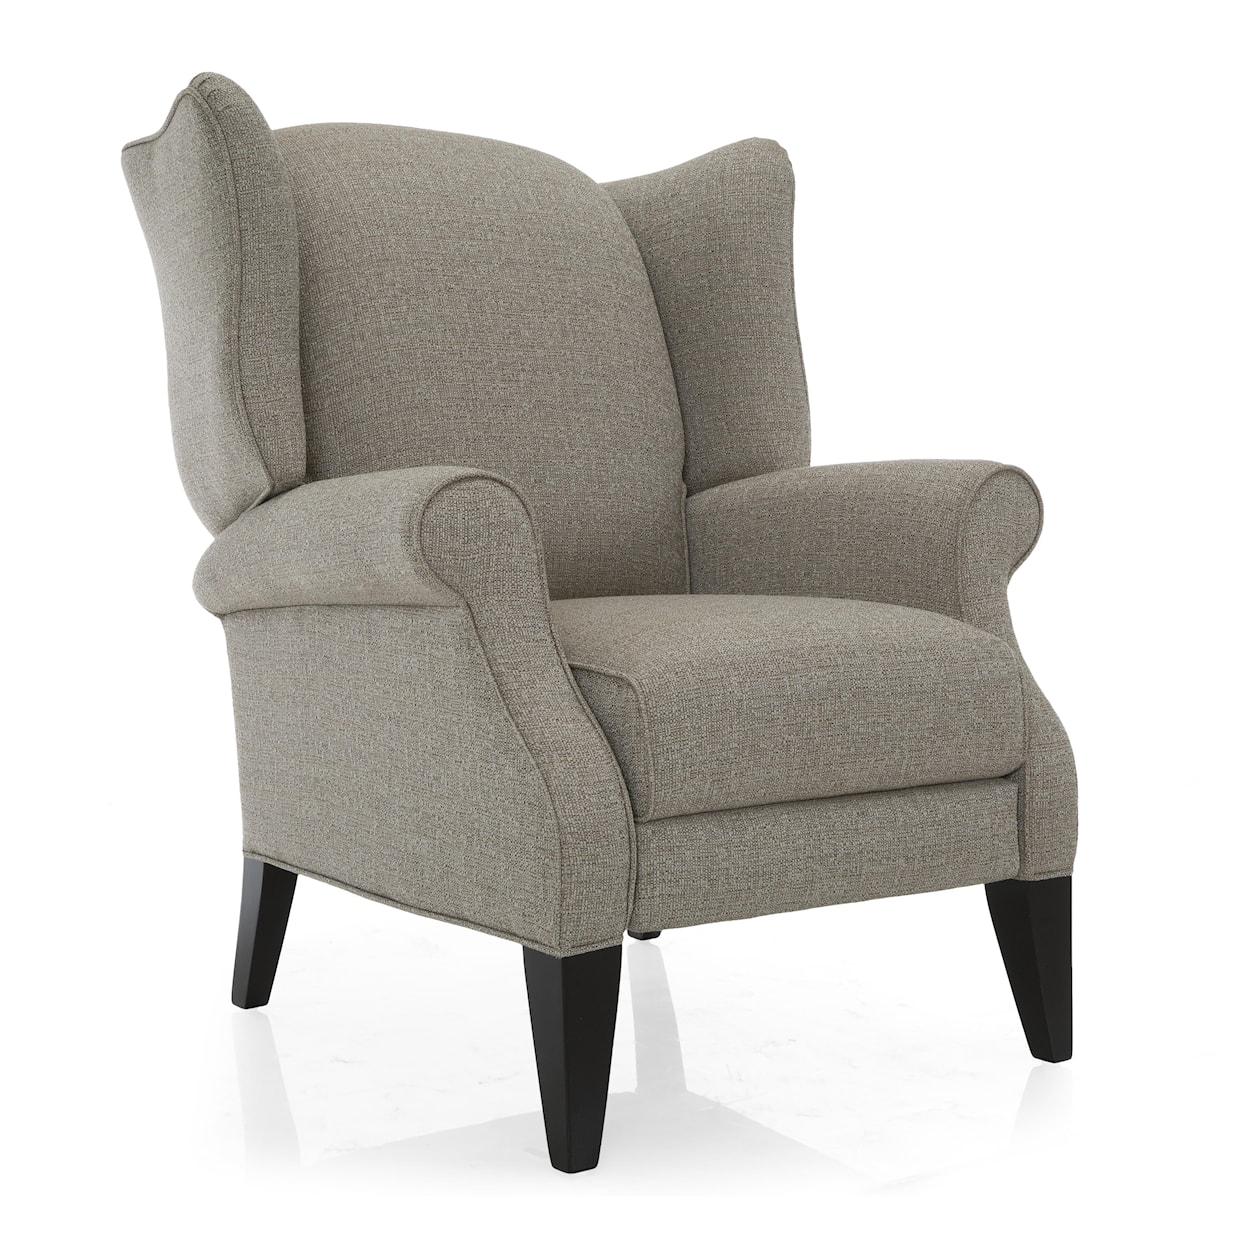 Decor-Rest 2220 Push Back Wing Chair